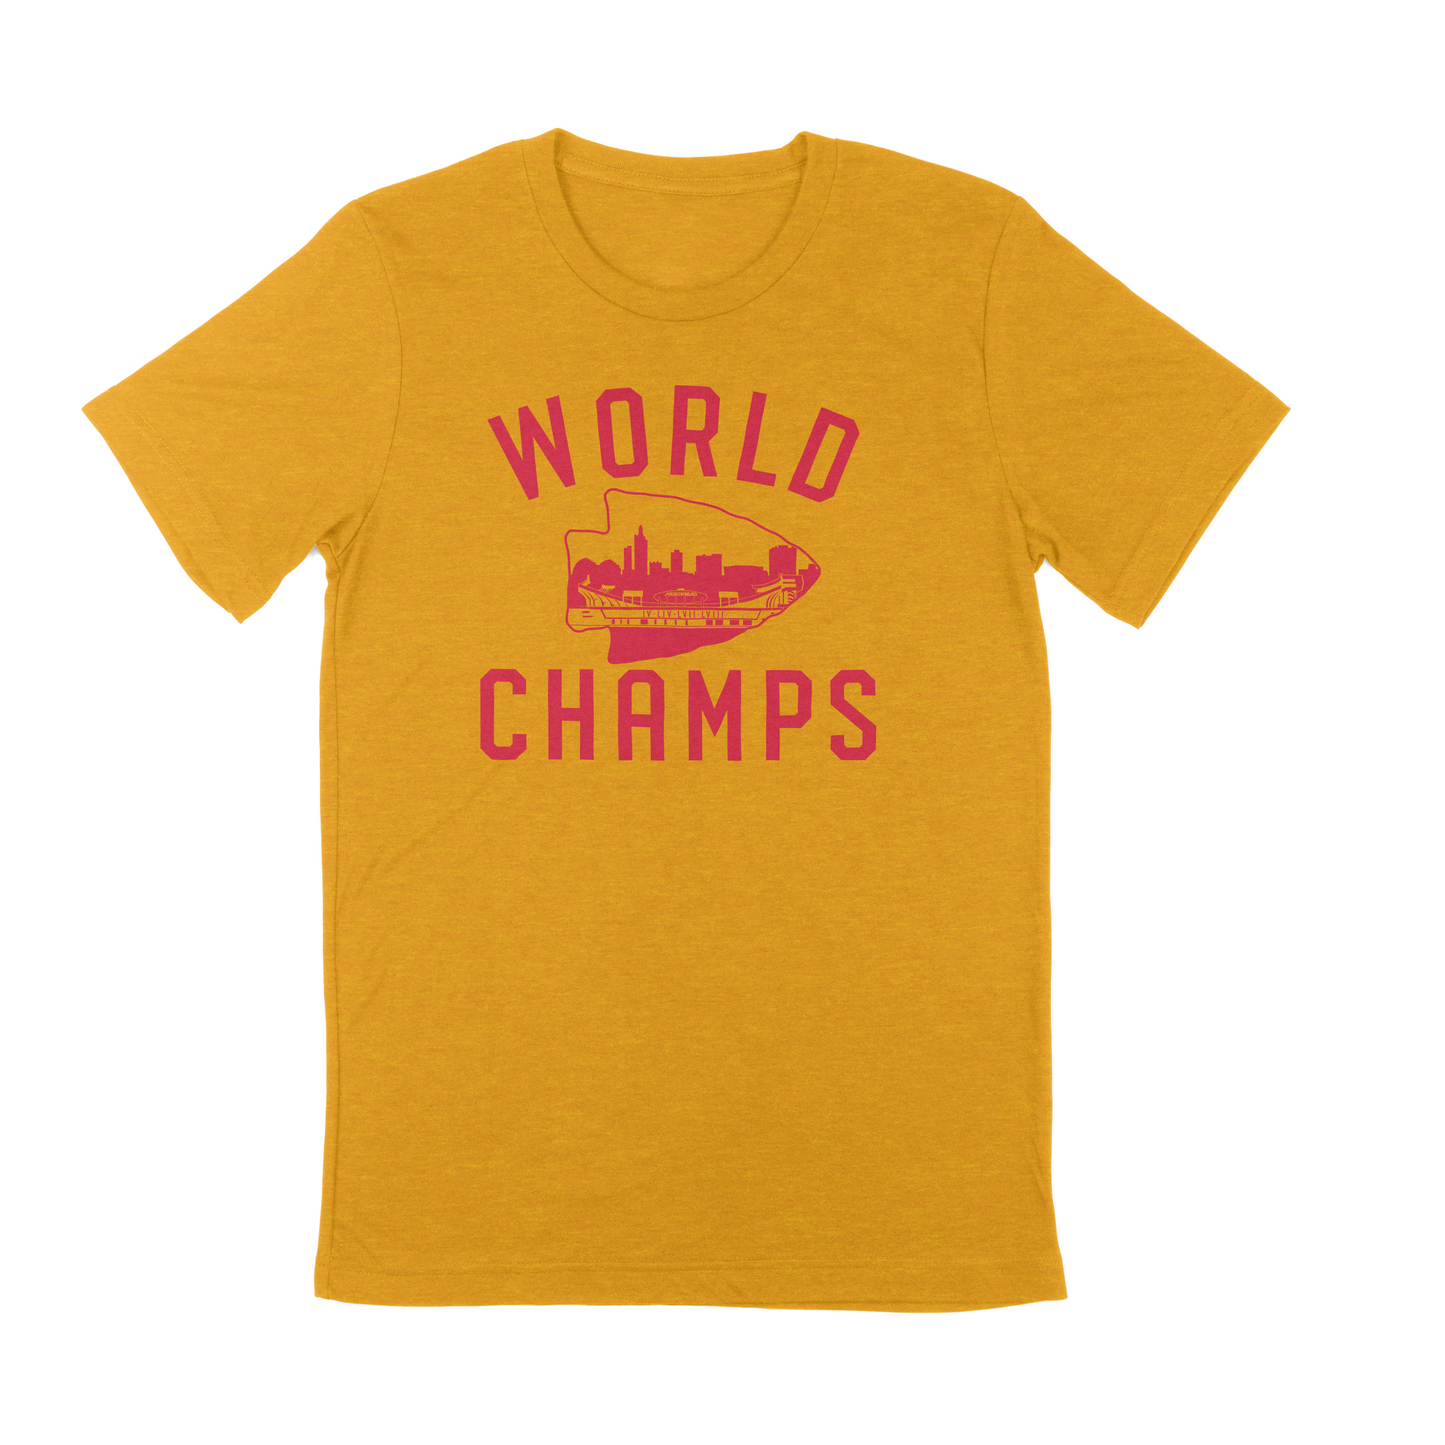 World Champs Adult Tee--Solid